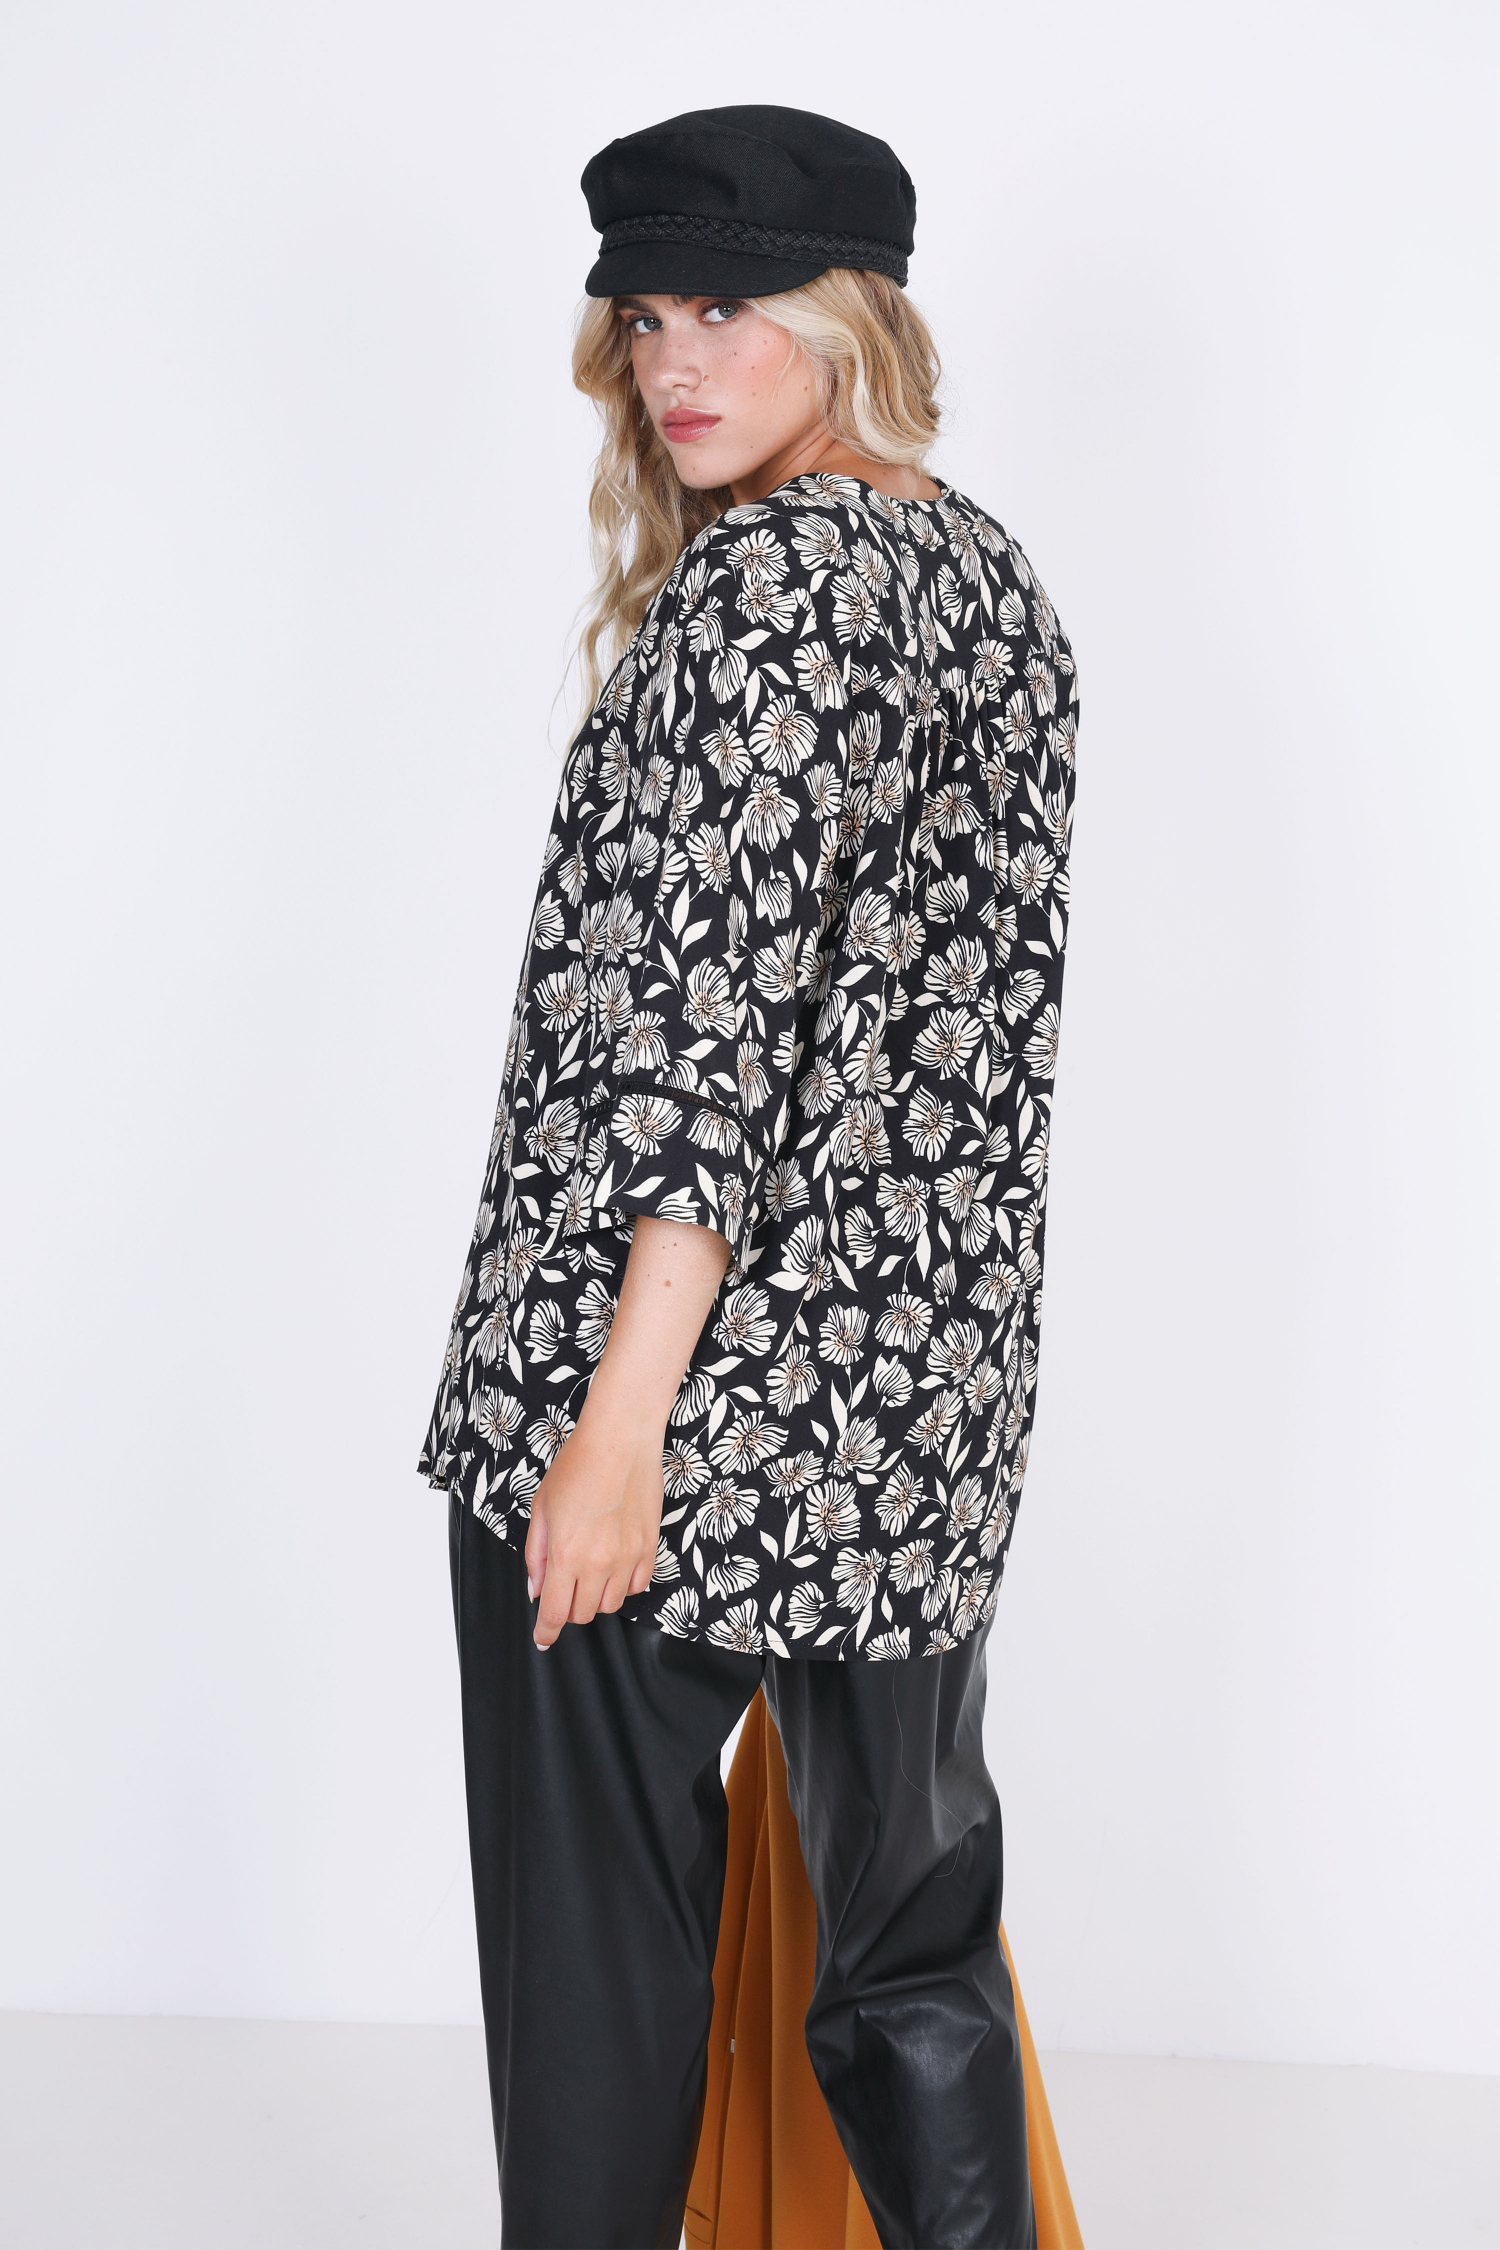 Mao collar printed blouse with braid